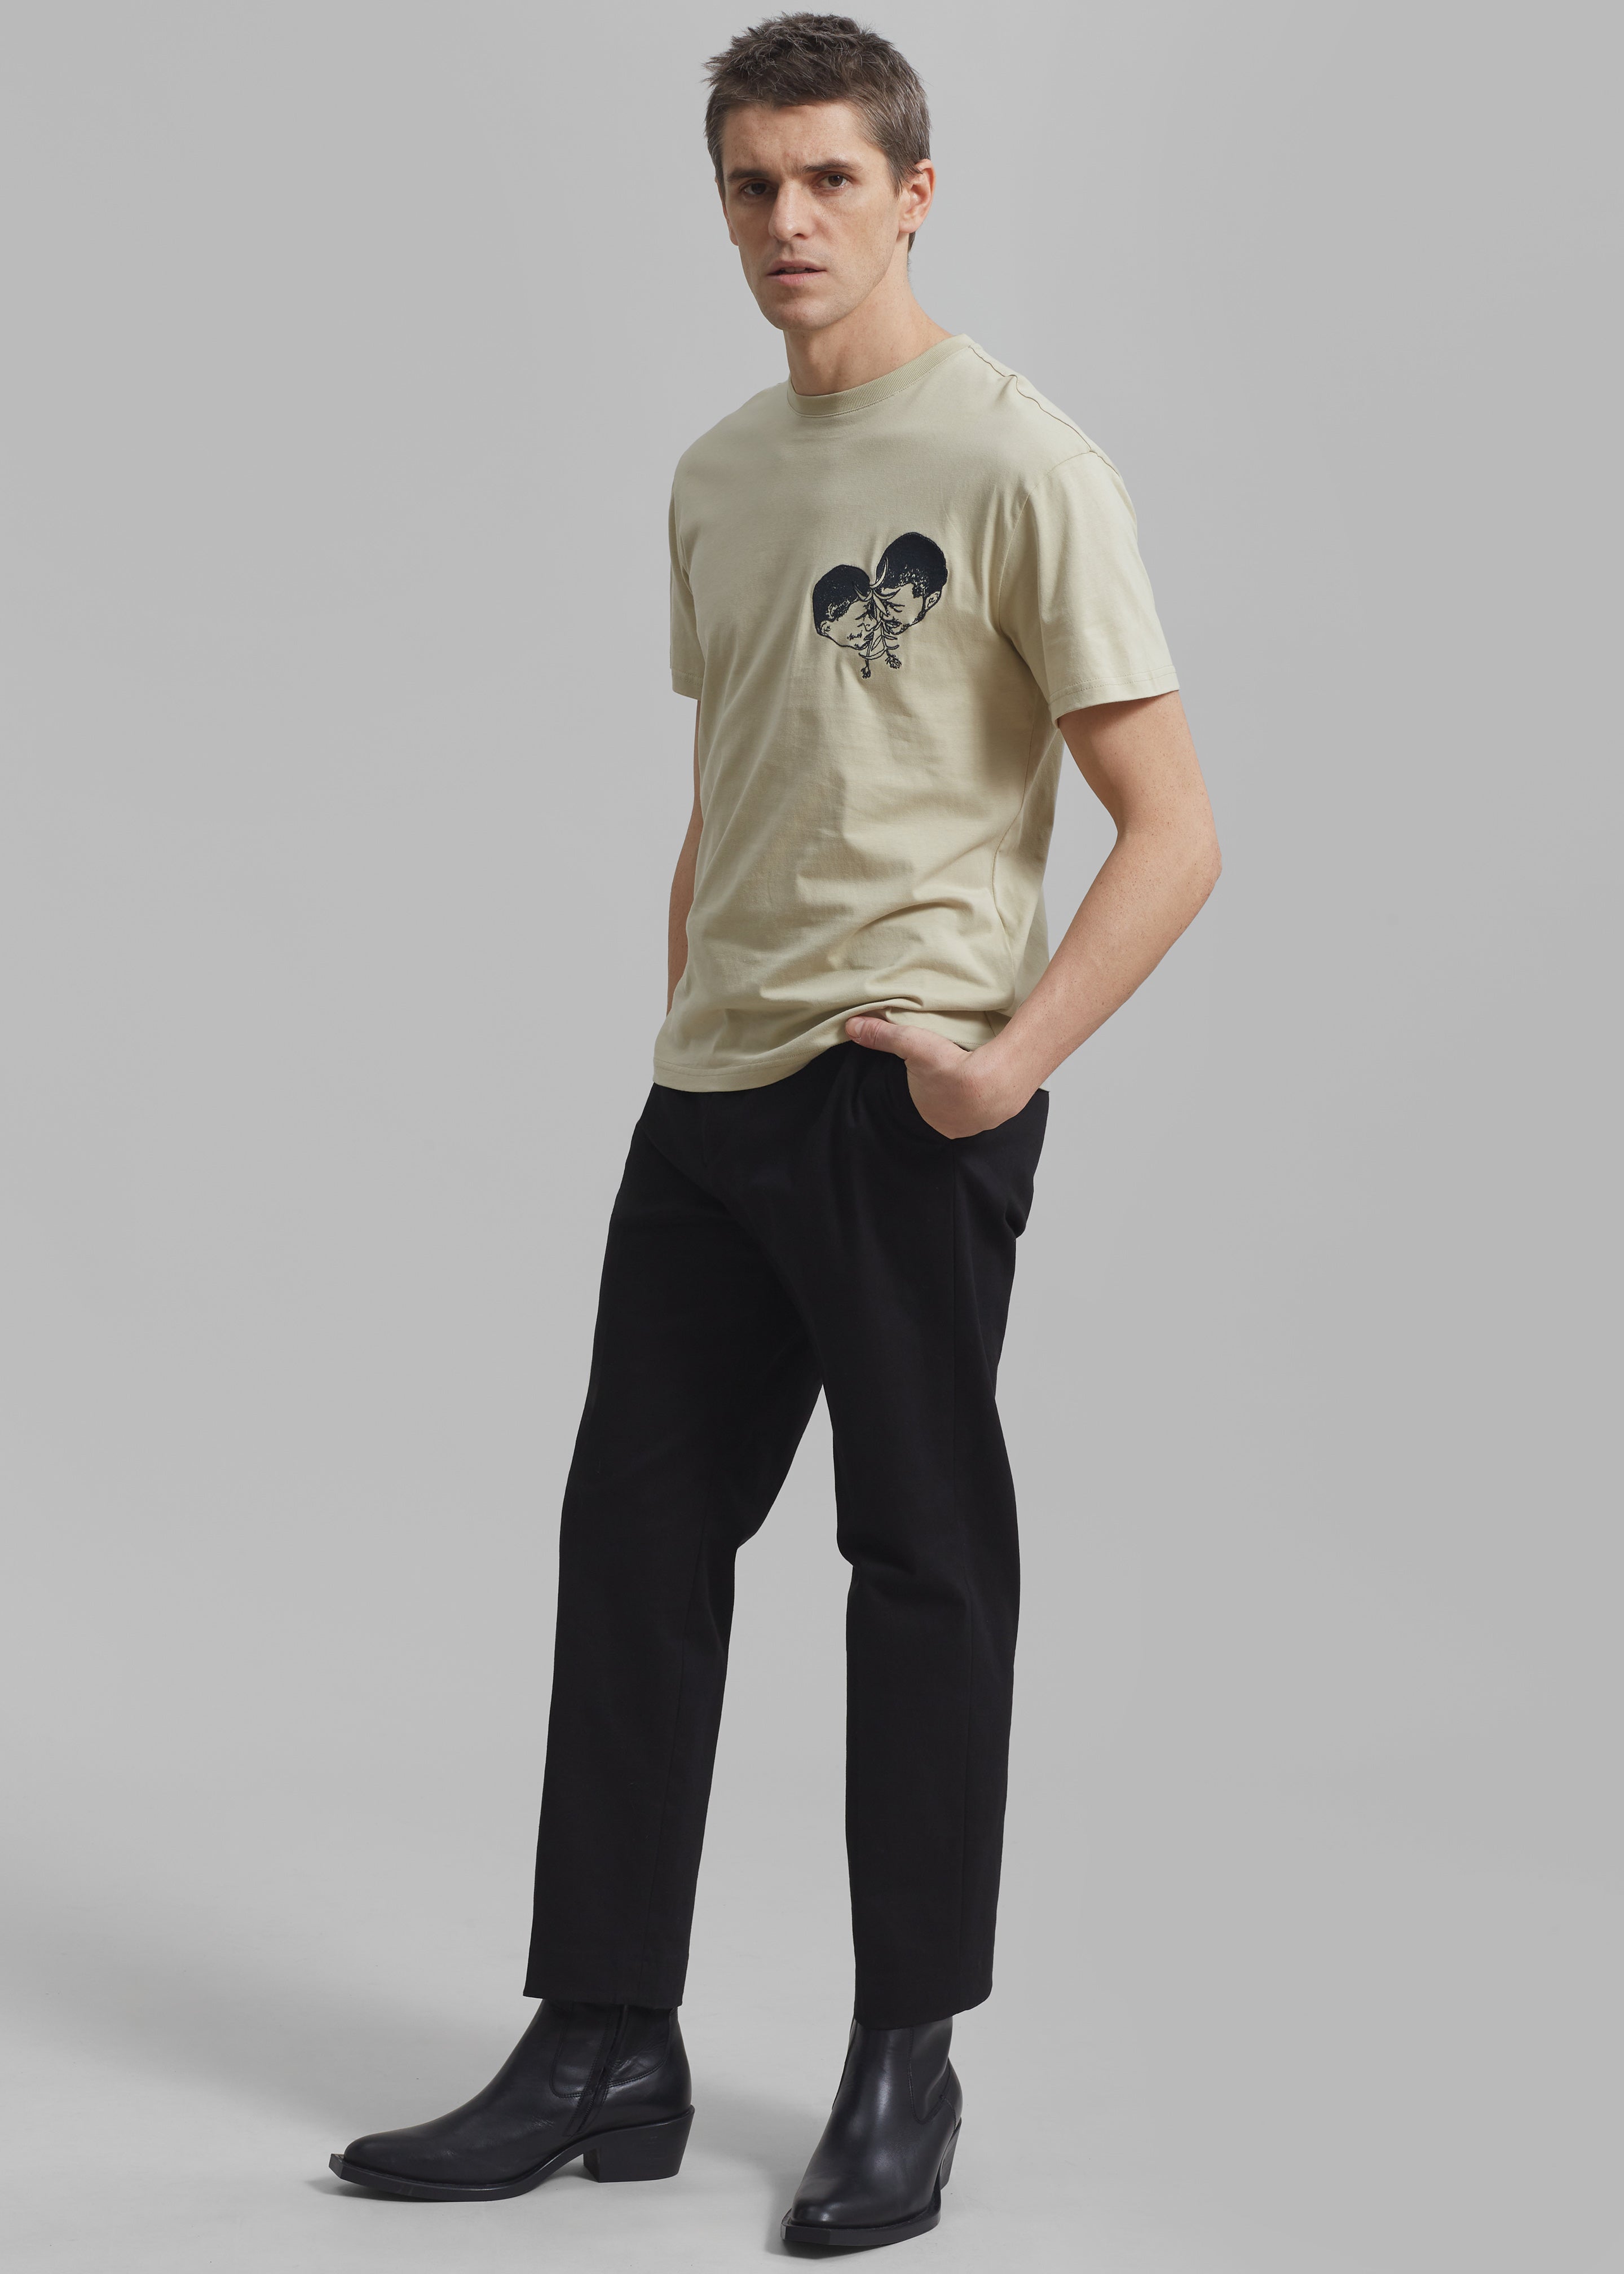 JW Anderson Polo Couple Embroidery T-Shirt - Beige - 1